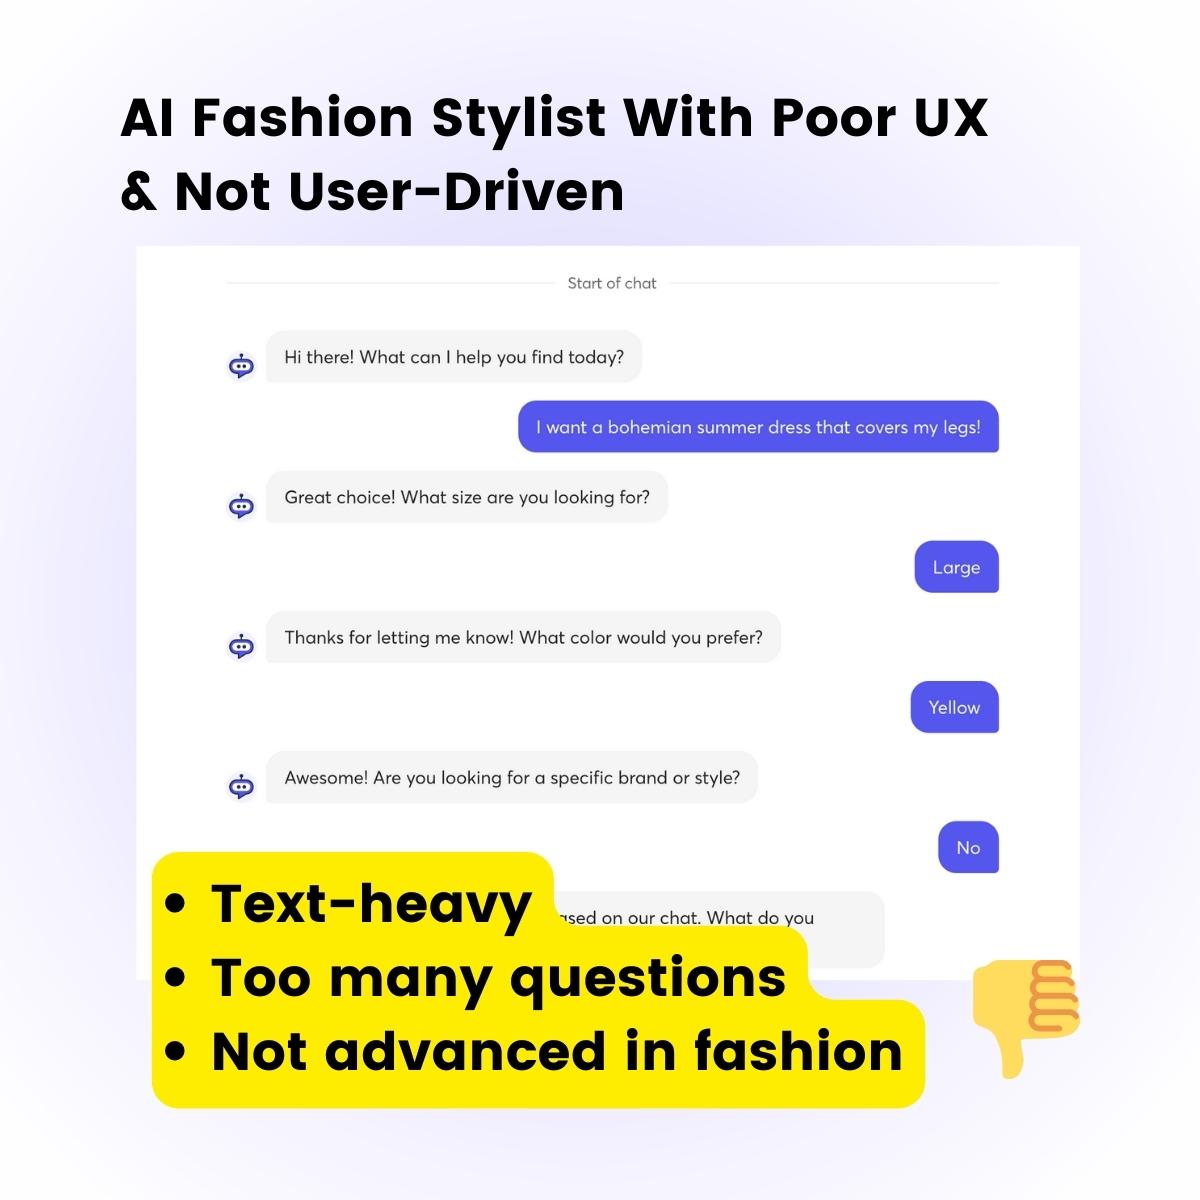 An example of poor UX for an AI fashion stylist